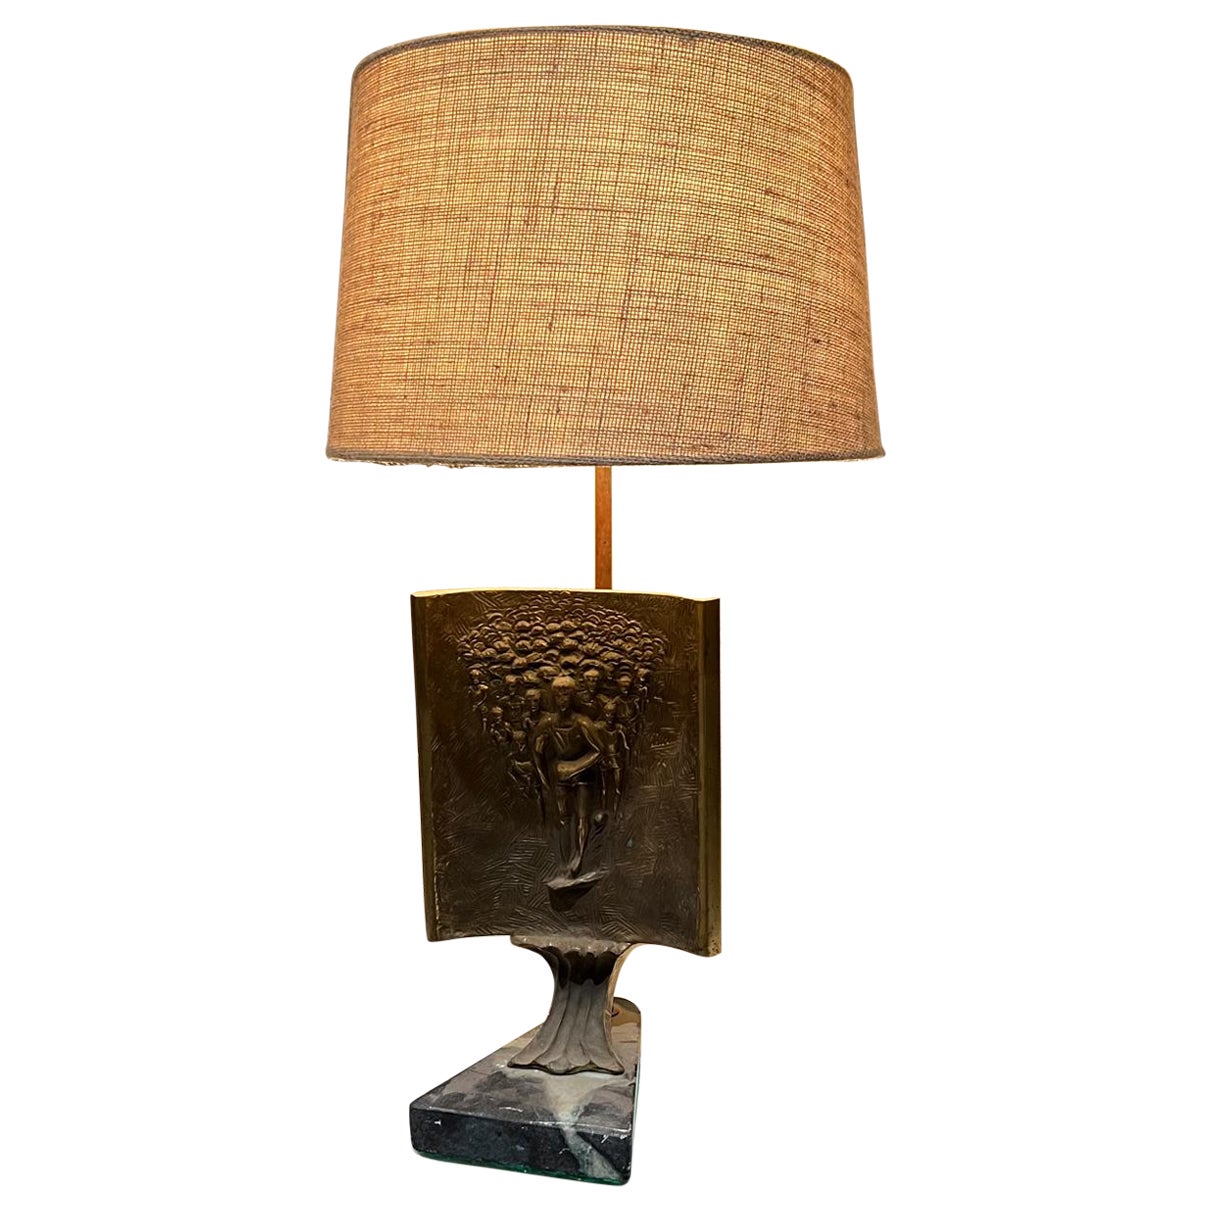 1960s Italian Table Lamp Art Mid Sculpture in Bronze Green Marble Base Italy For Sale